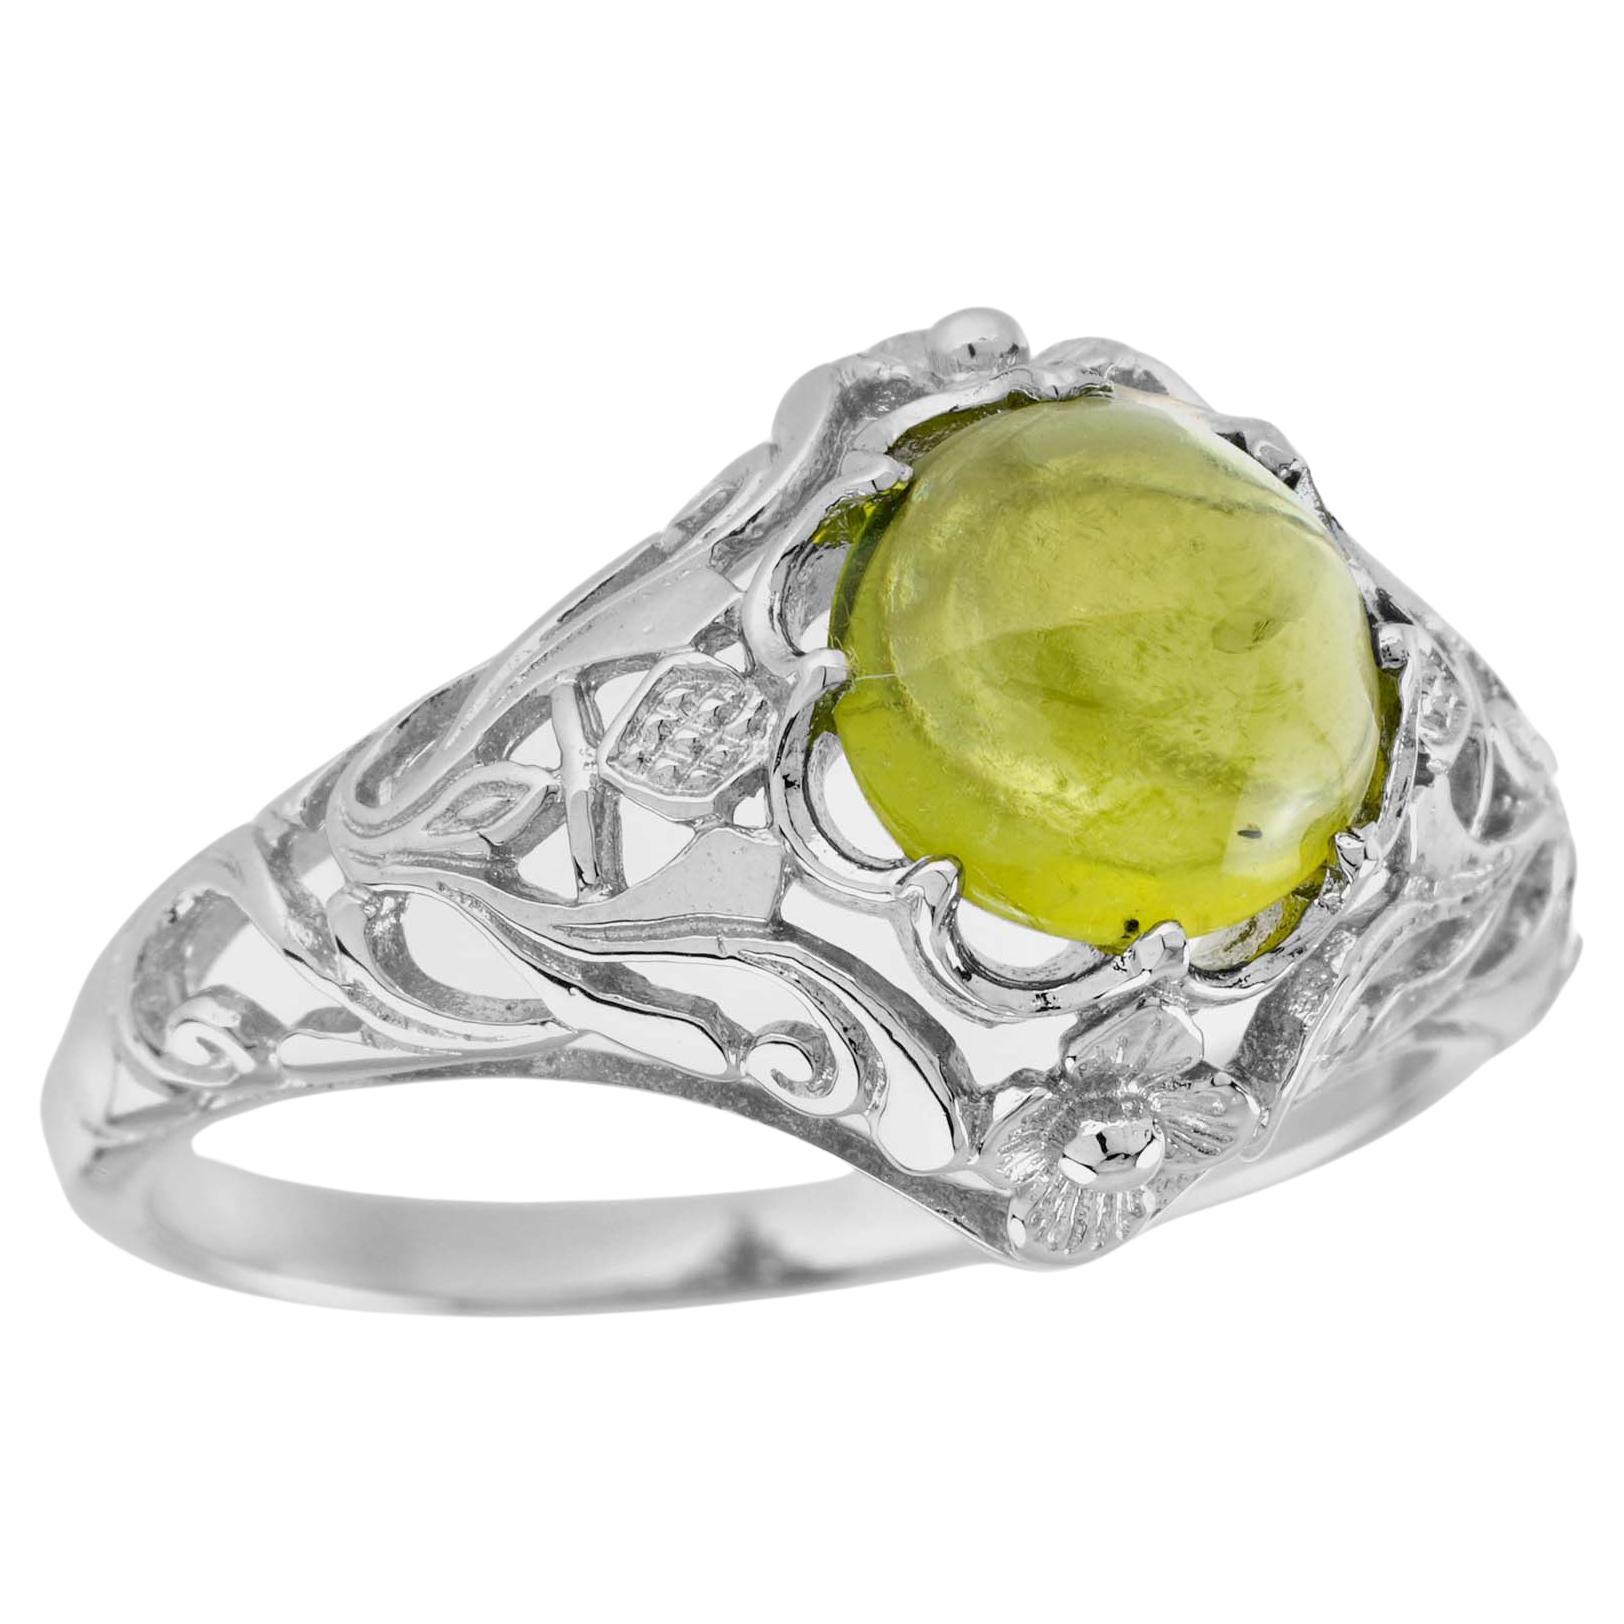 For Sale:  Natural Cabochon Peridot Vintage Style Filigree Ring in Solid 9K White Gold